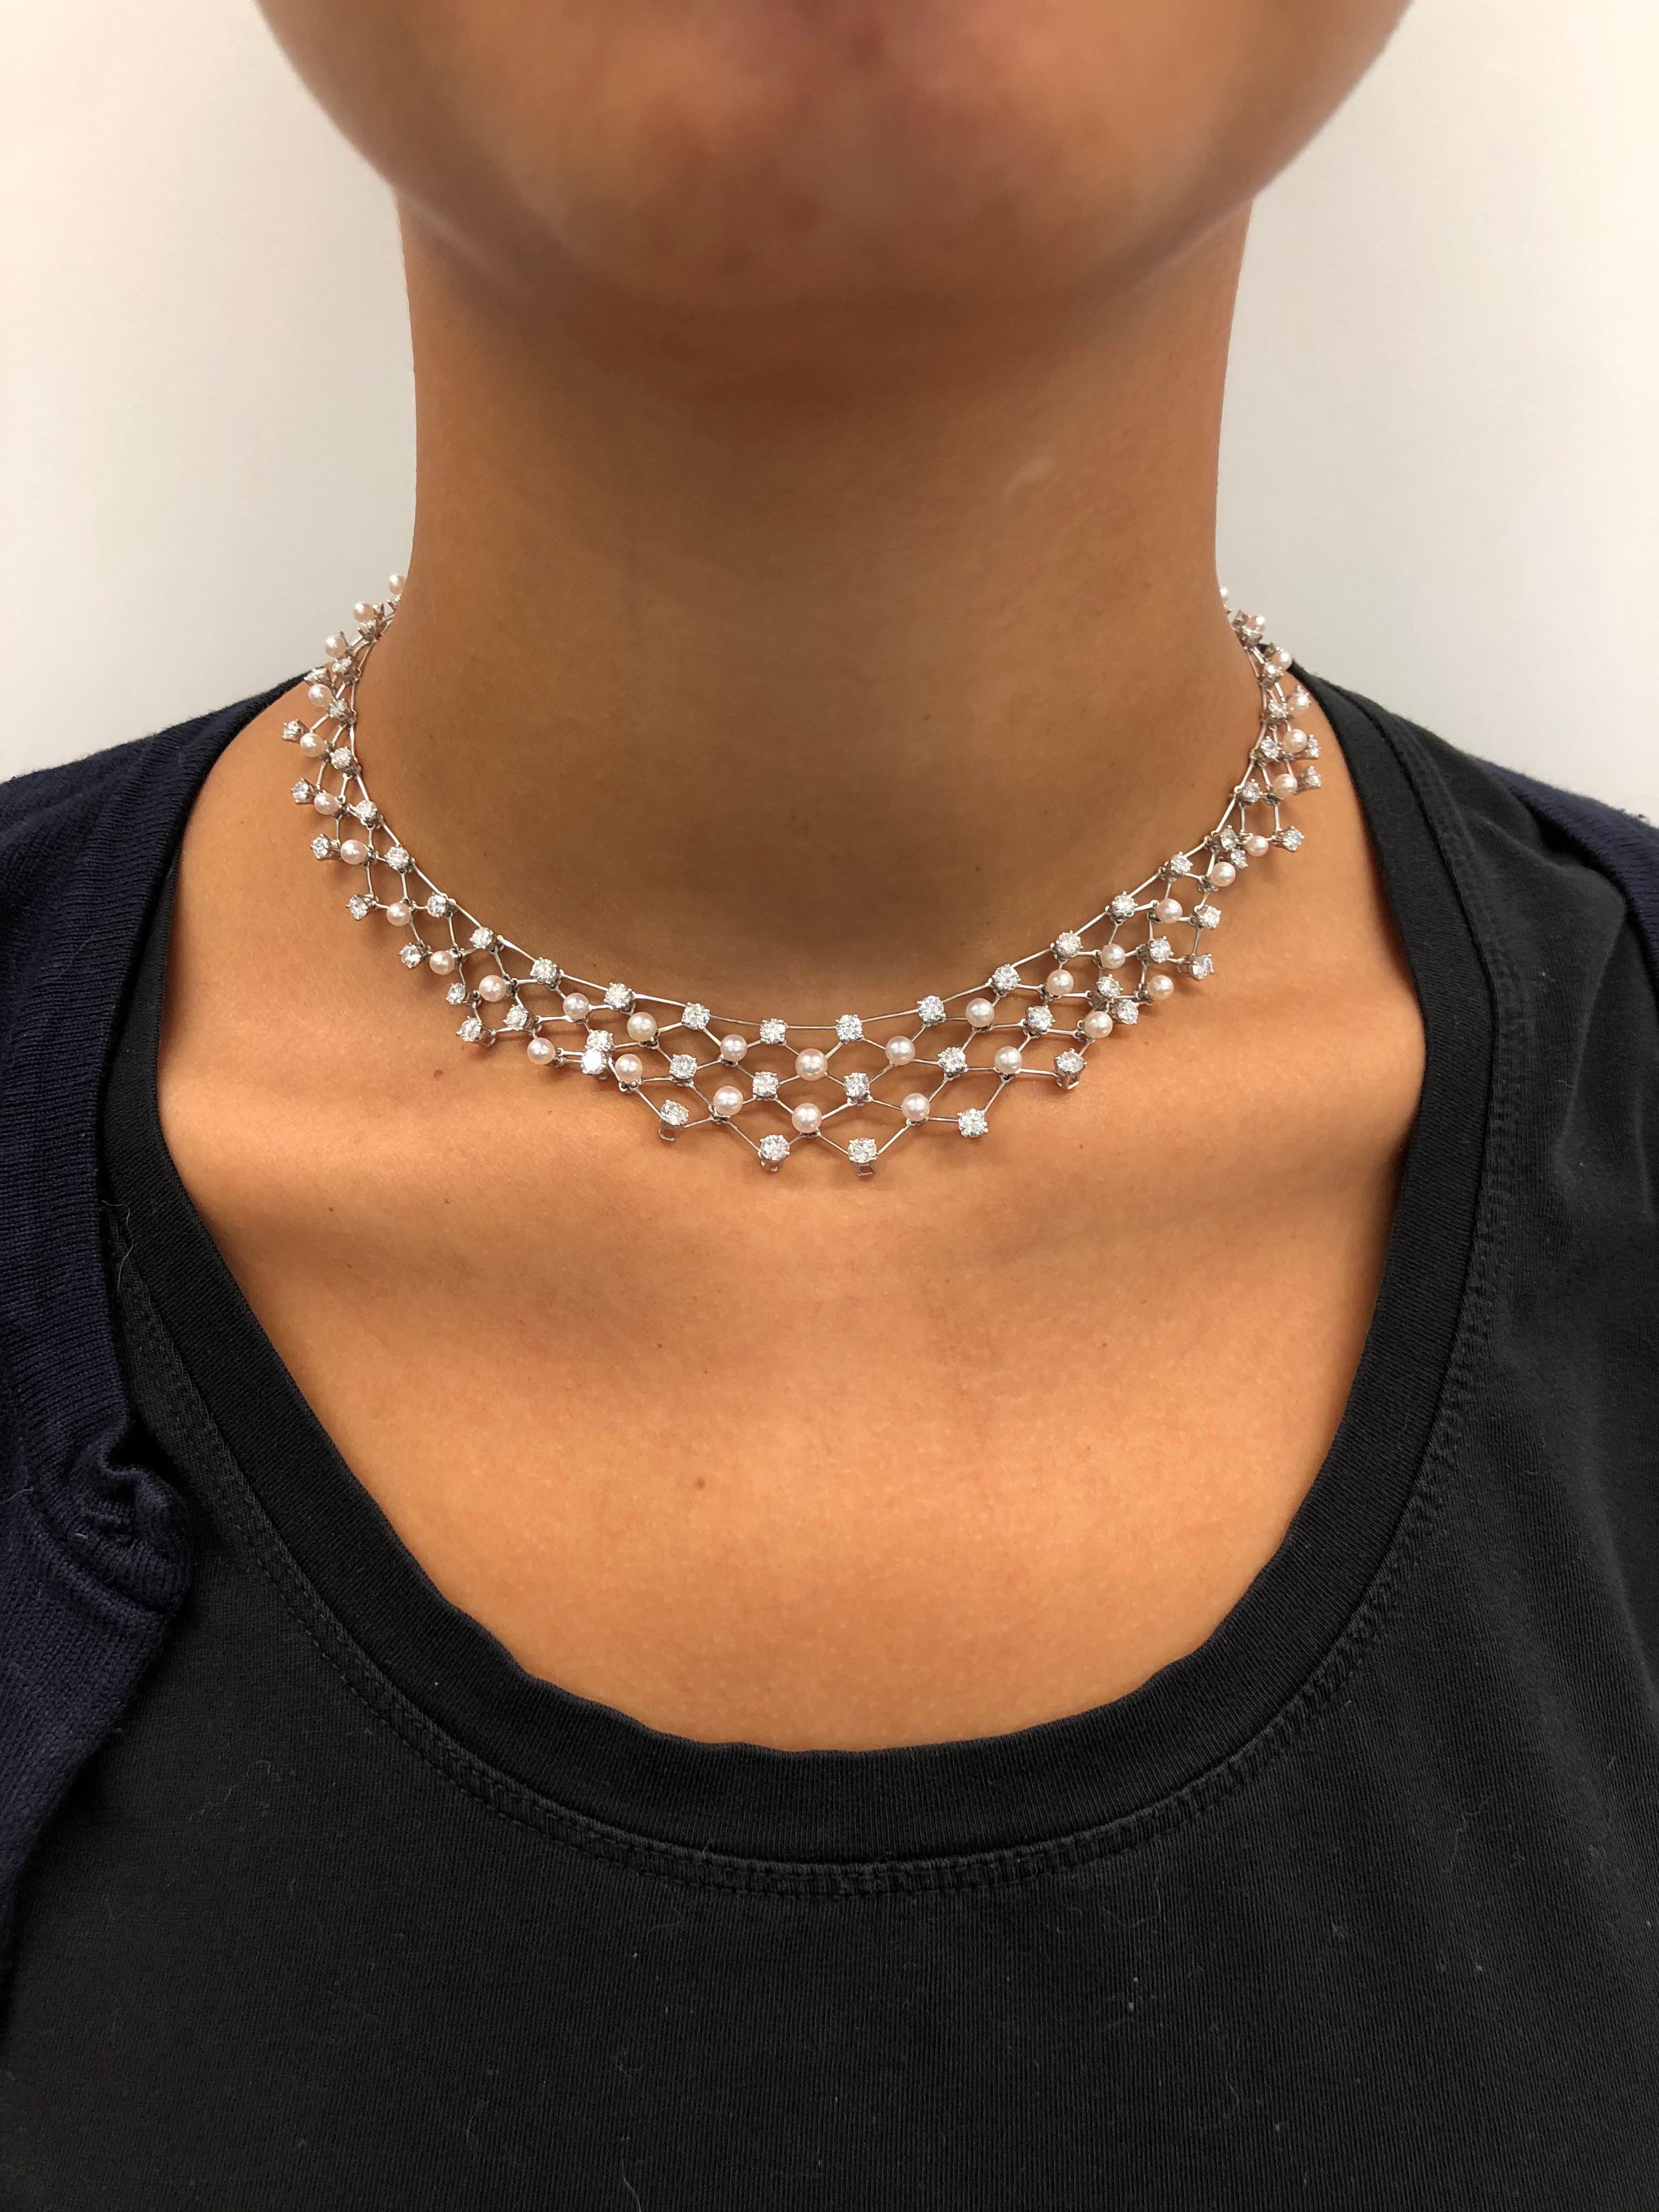 Diamond and Akoya Cultured Pearls Necklace in 950 Platinum For Sale 4